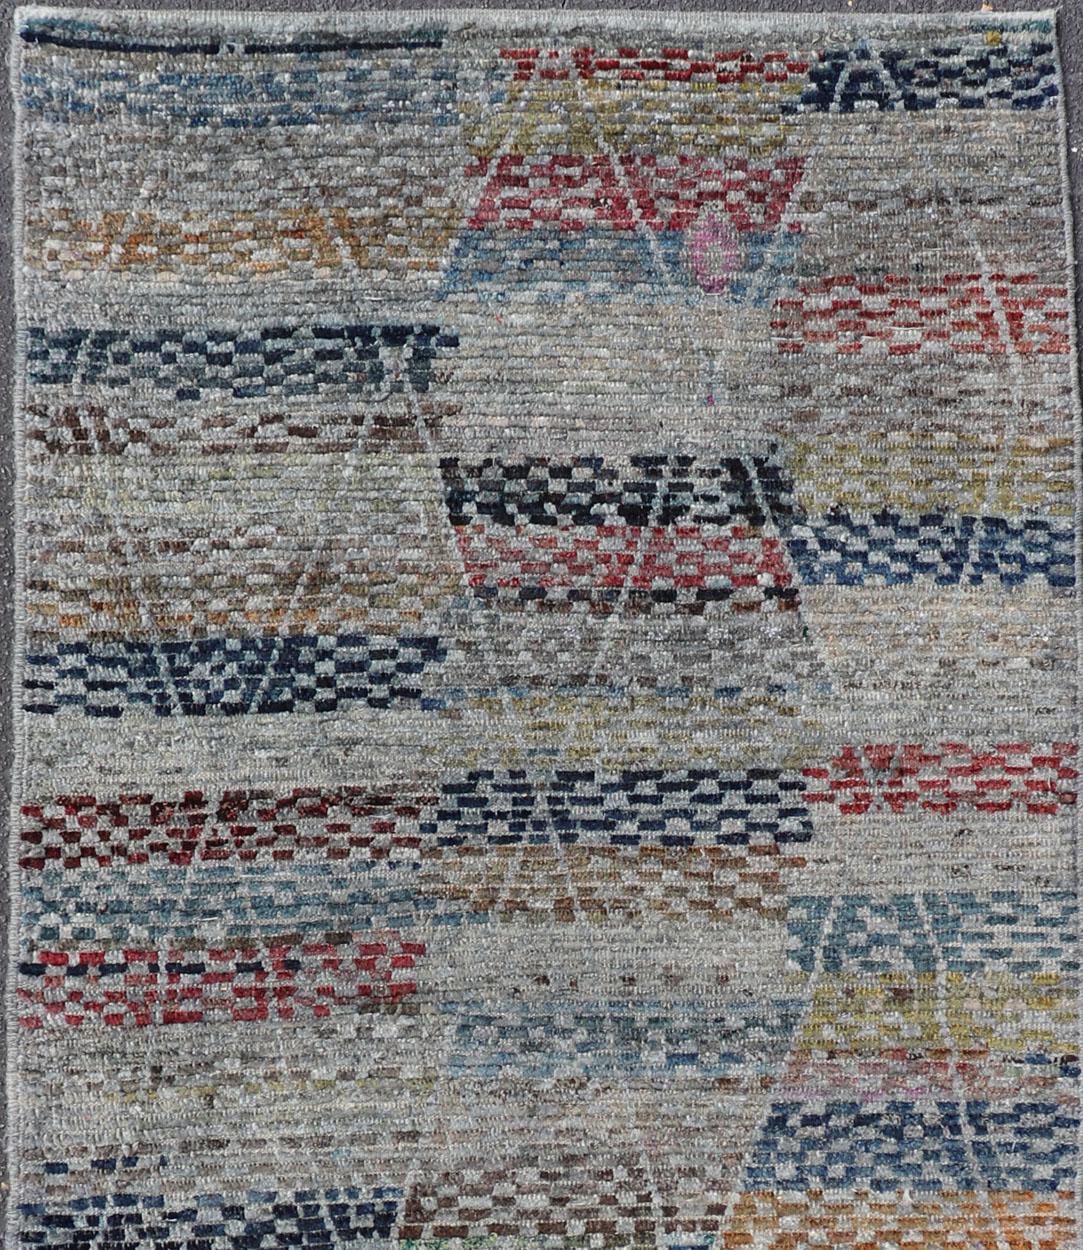 Modern and casual Gallery Runner Neutrals, charcoal, gray, red, blue and brown diamond Afghan Modern Kilim Geometric design. Keivan Woven Arts / Rug AFG-31832, country of origin / type: Afghanistan / piled

The unique design of this groovy tribal